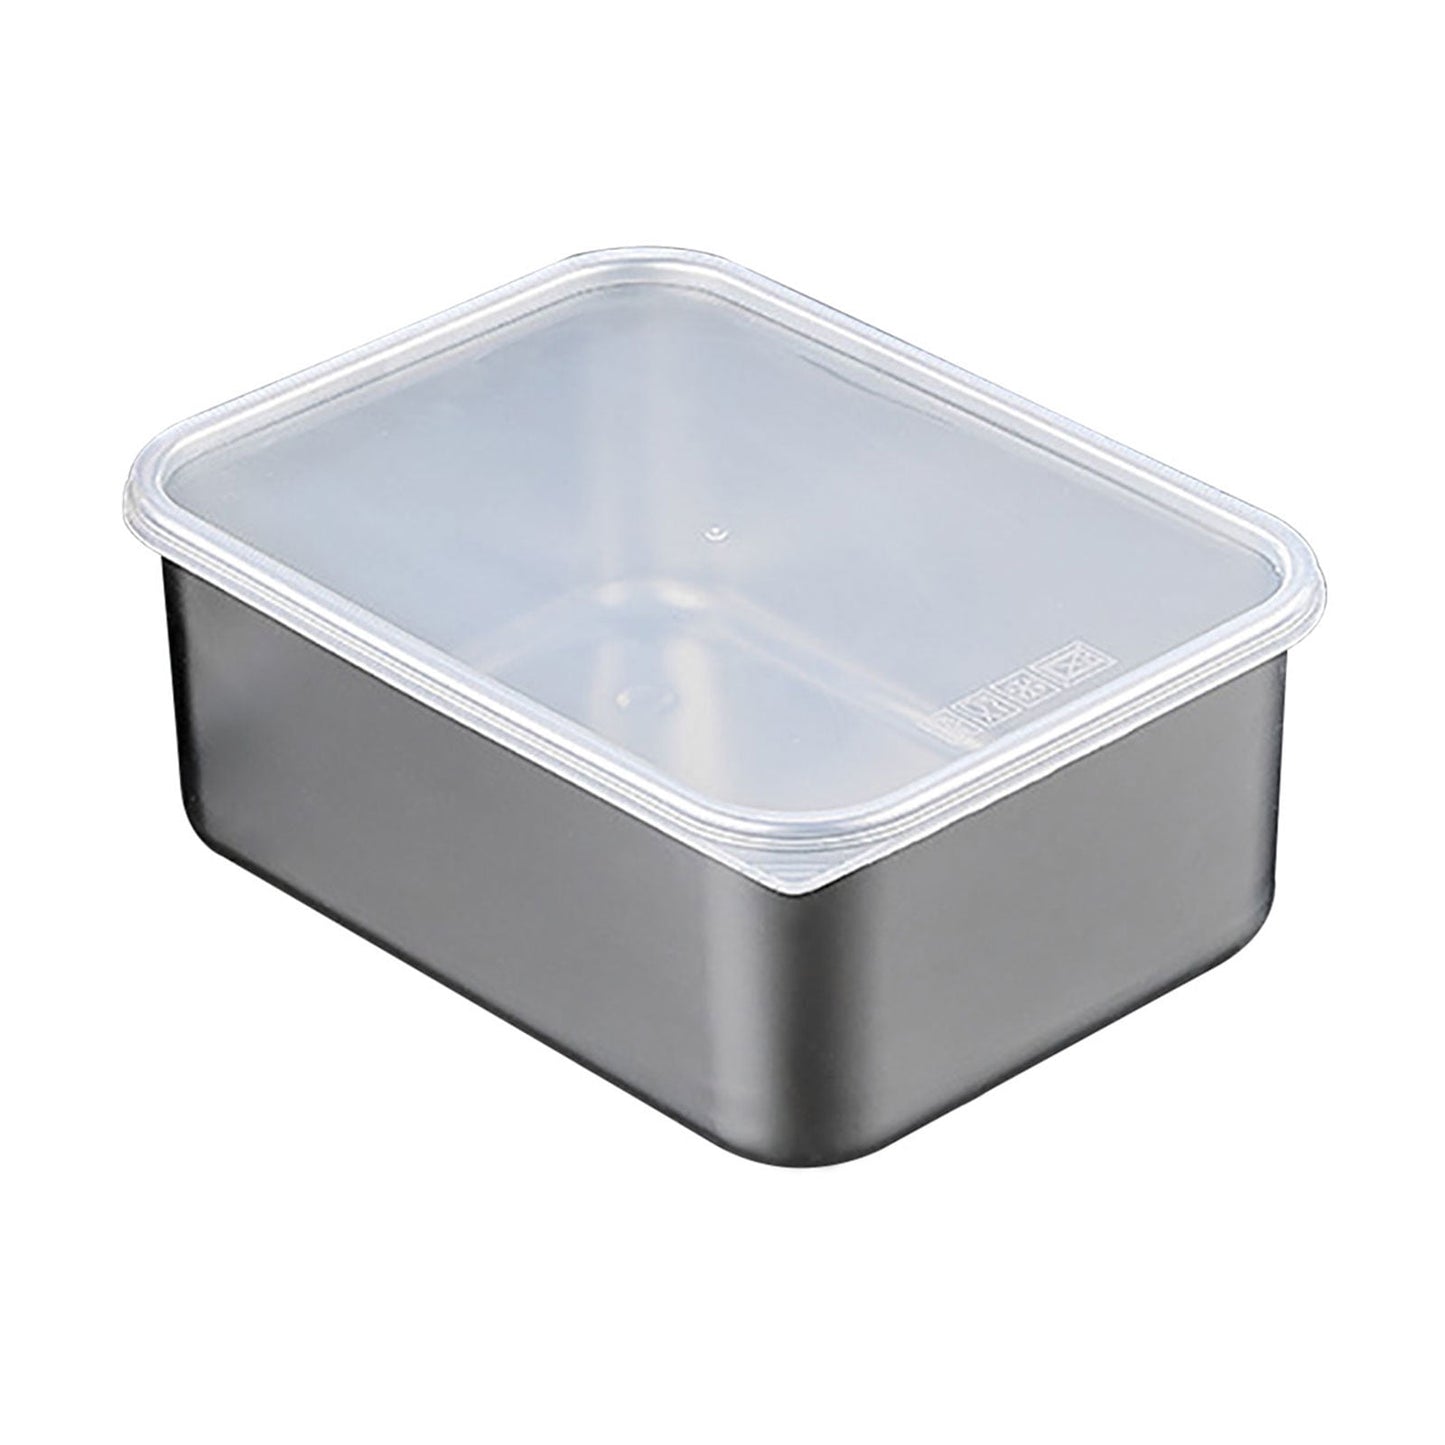 Tripumer Food Grade Leak-proof Food Container with Clear Lid Stainless Steel Bento Box Insulation Cold Preservation Large Capacity Freezer Box for Dinning Room Silver